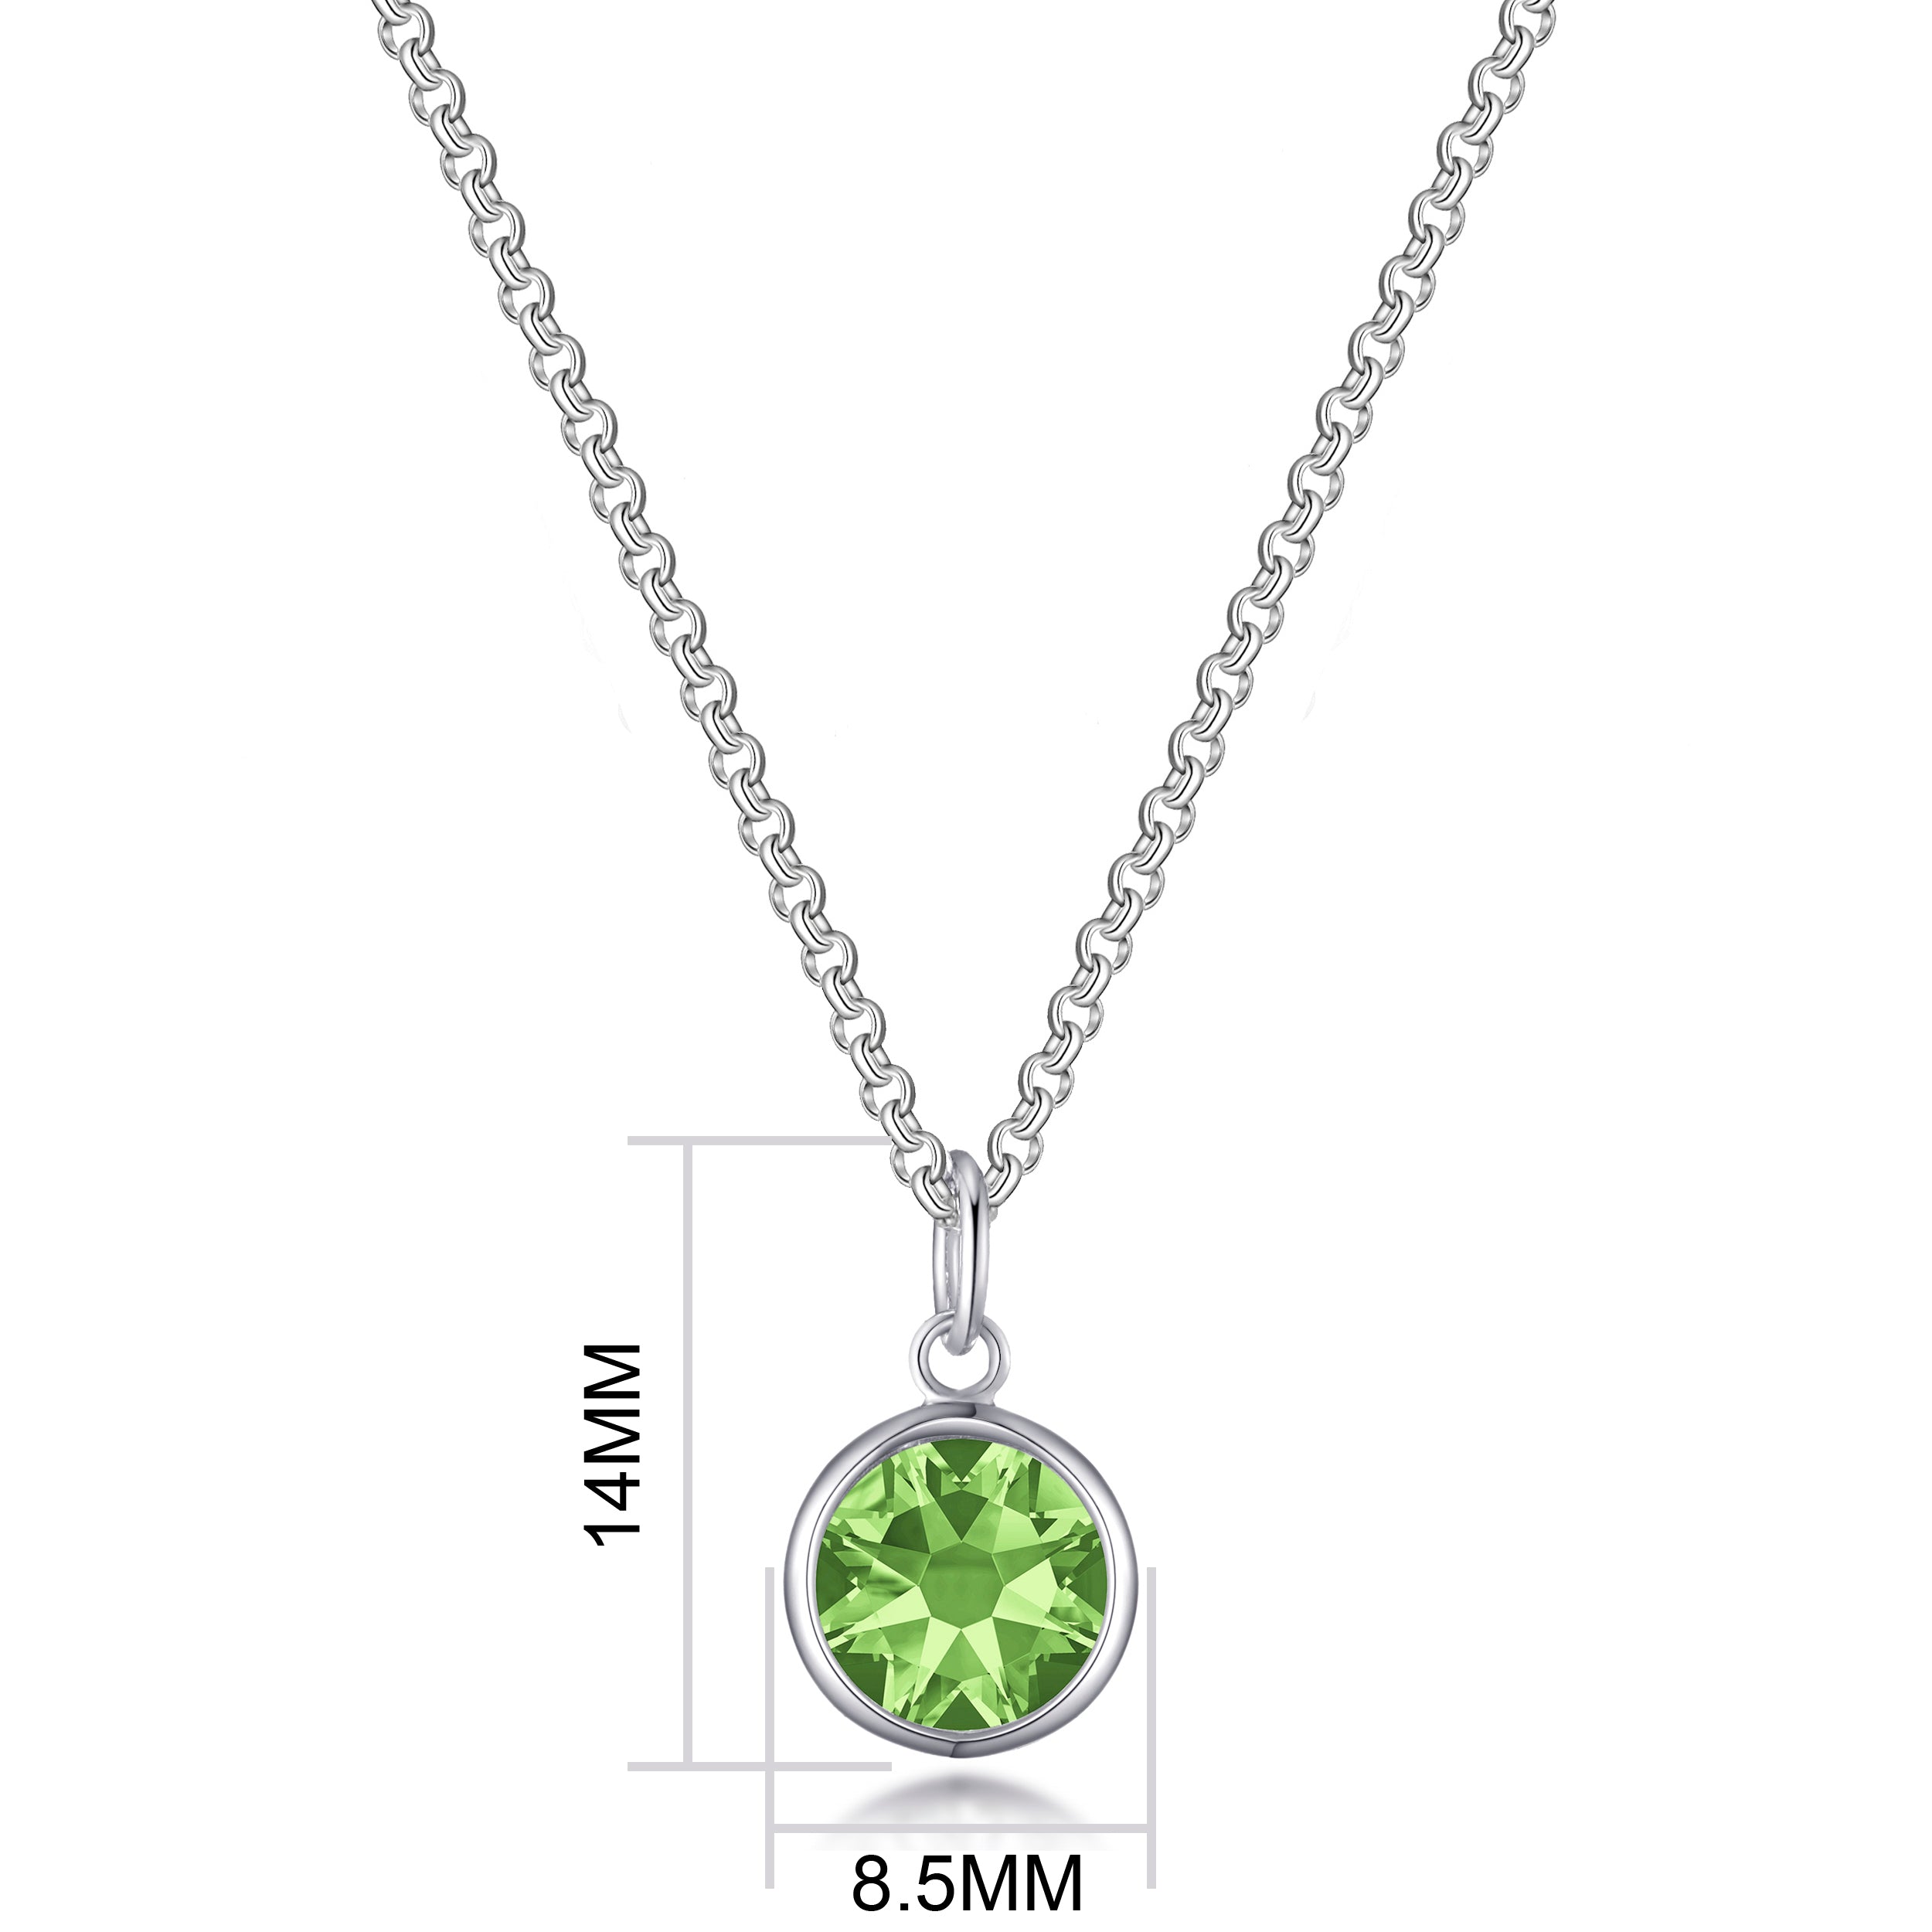 August Initial Birthstone Necklace Created with Zircondia® Crystals